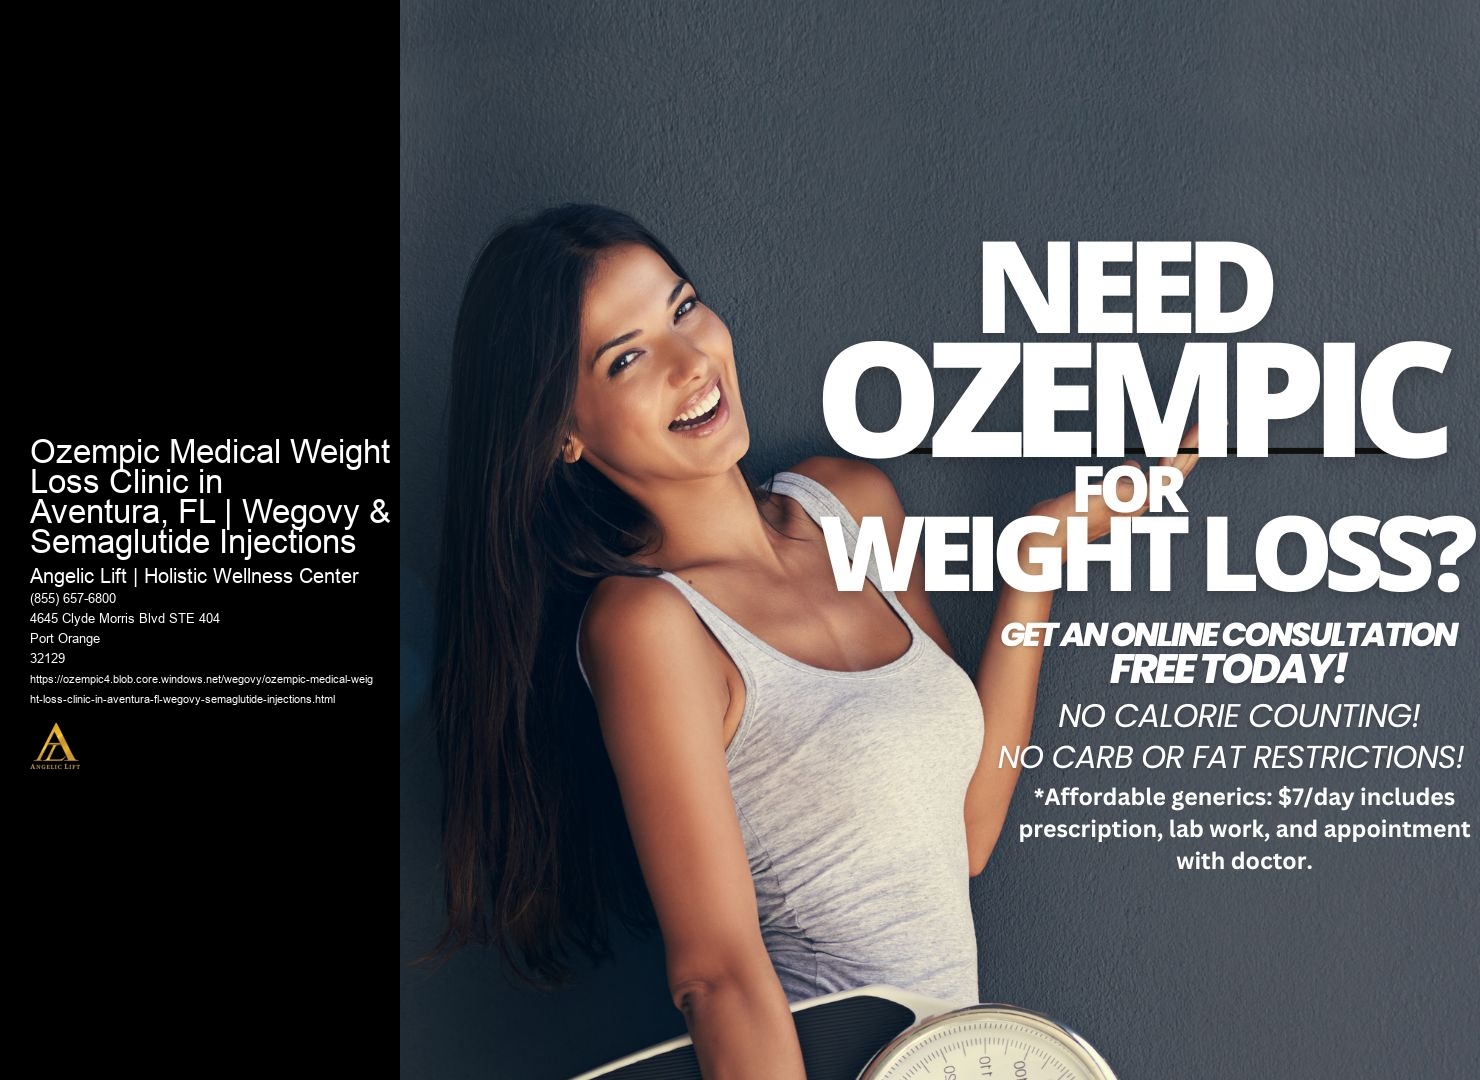 Ozempic Medical Weight Loss Clinic in Aventura, FL | Wegovy & Semaglutide Injections